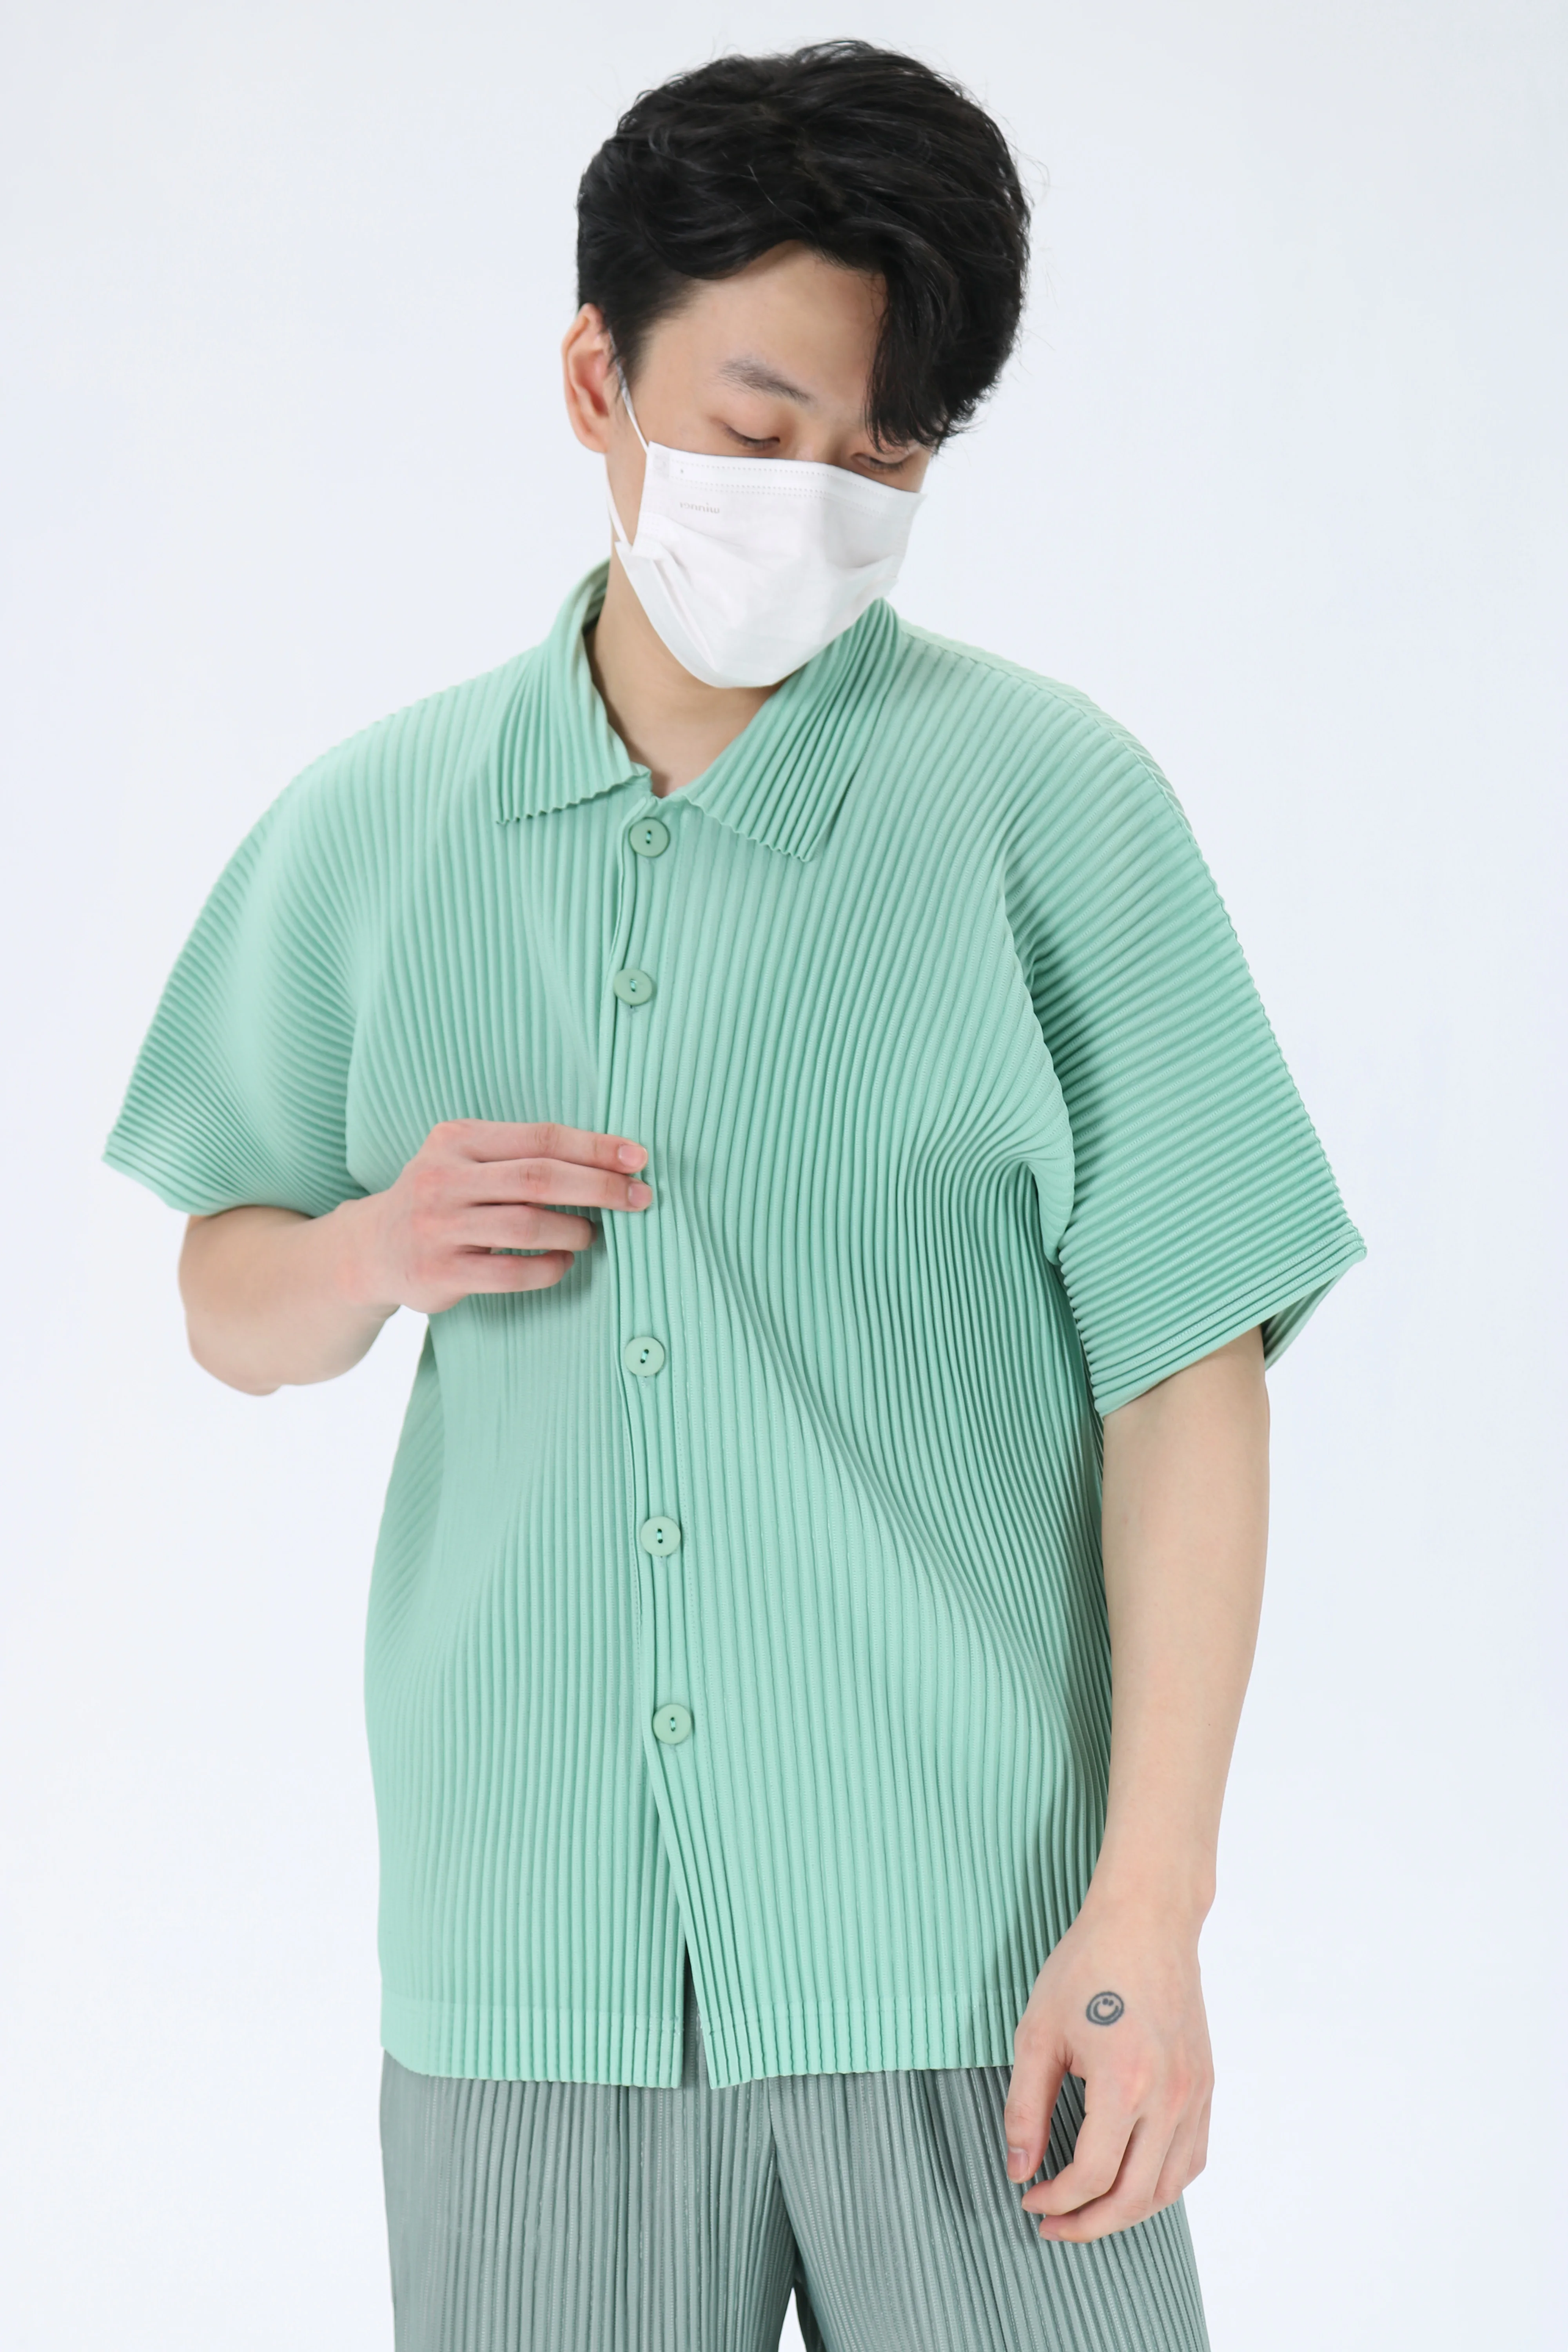 Pleated Polo Shirt  miteigi Homme Plissé Issey Miyaki Men's Casual Short Sleeves ribbed Button Up Loose Vintage Tops Shirts for man in light green Summer plus size mens Business workwear Fashion